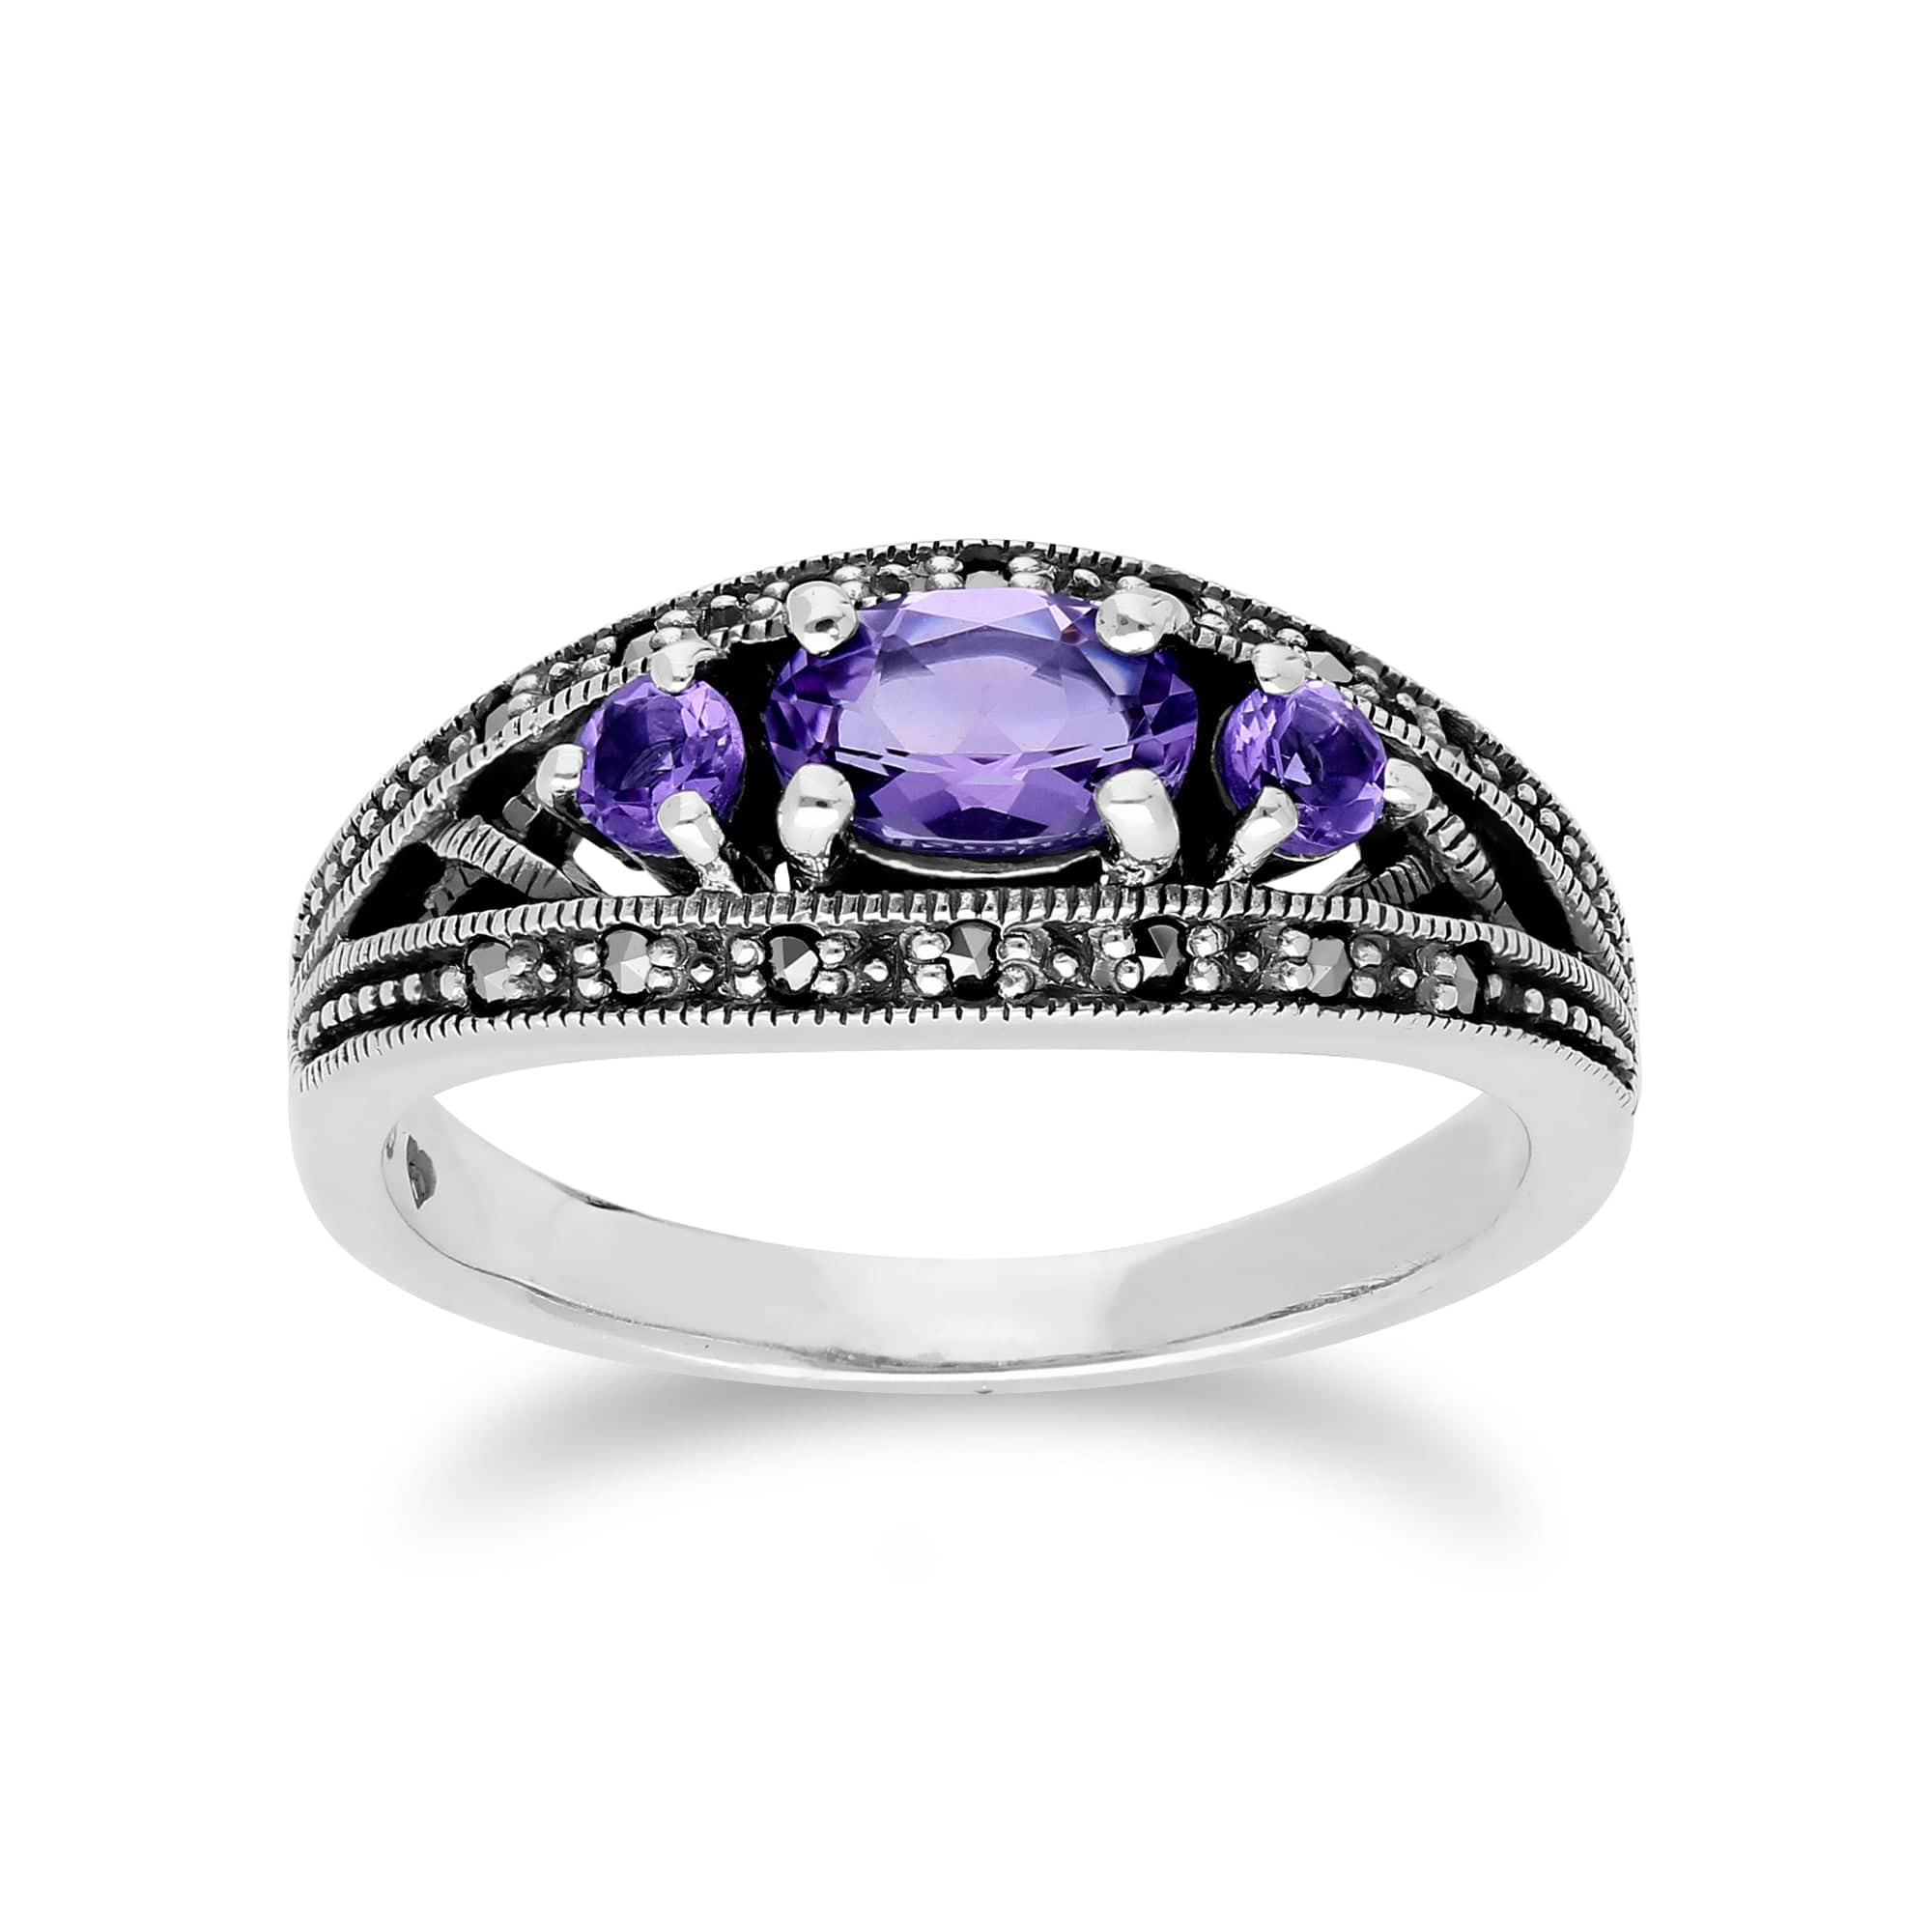 Art Deco Style Oval Amethyst & Marcasite Three Stone Ring in 925 Sterling Silver - Gemondo